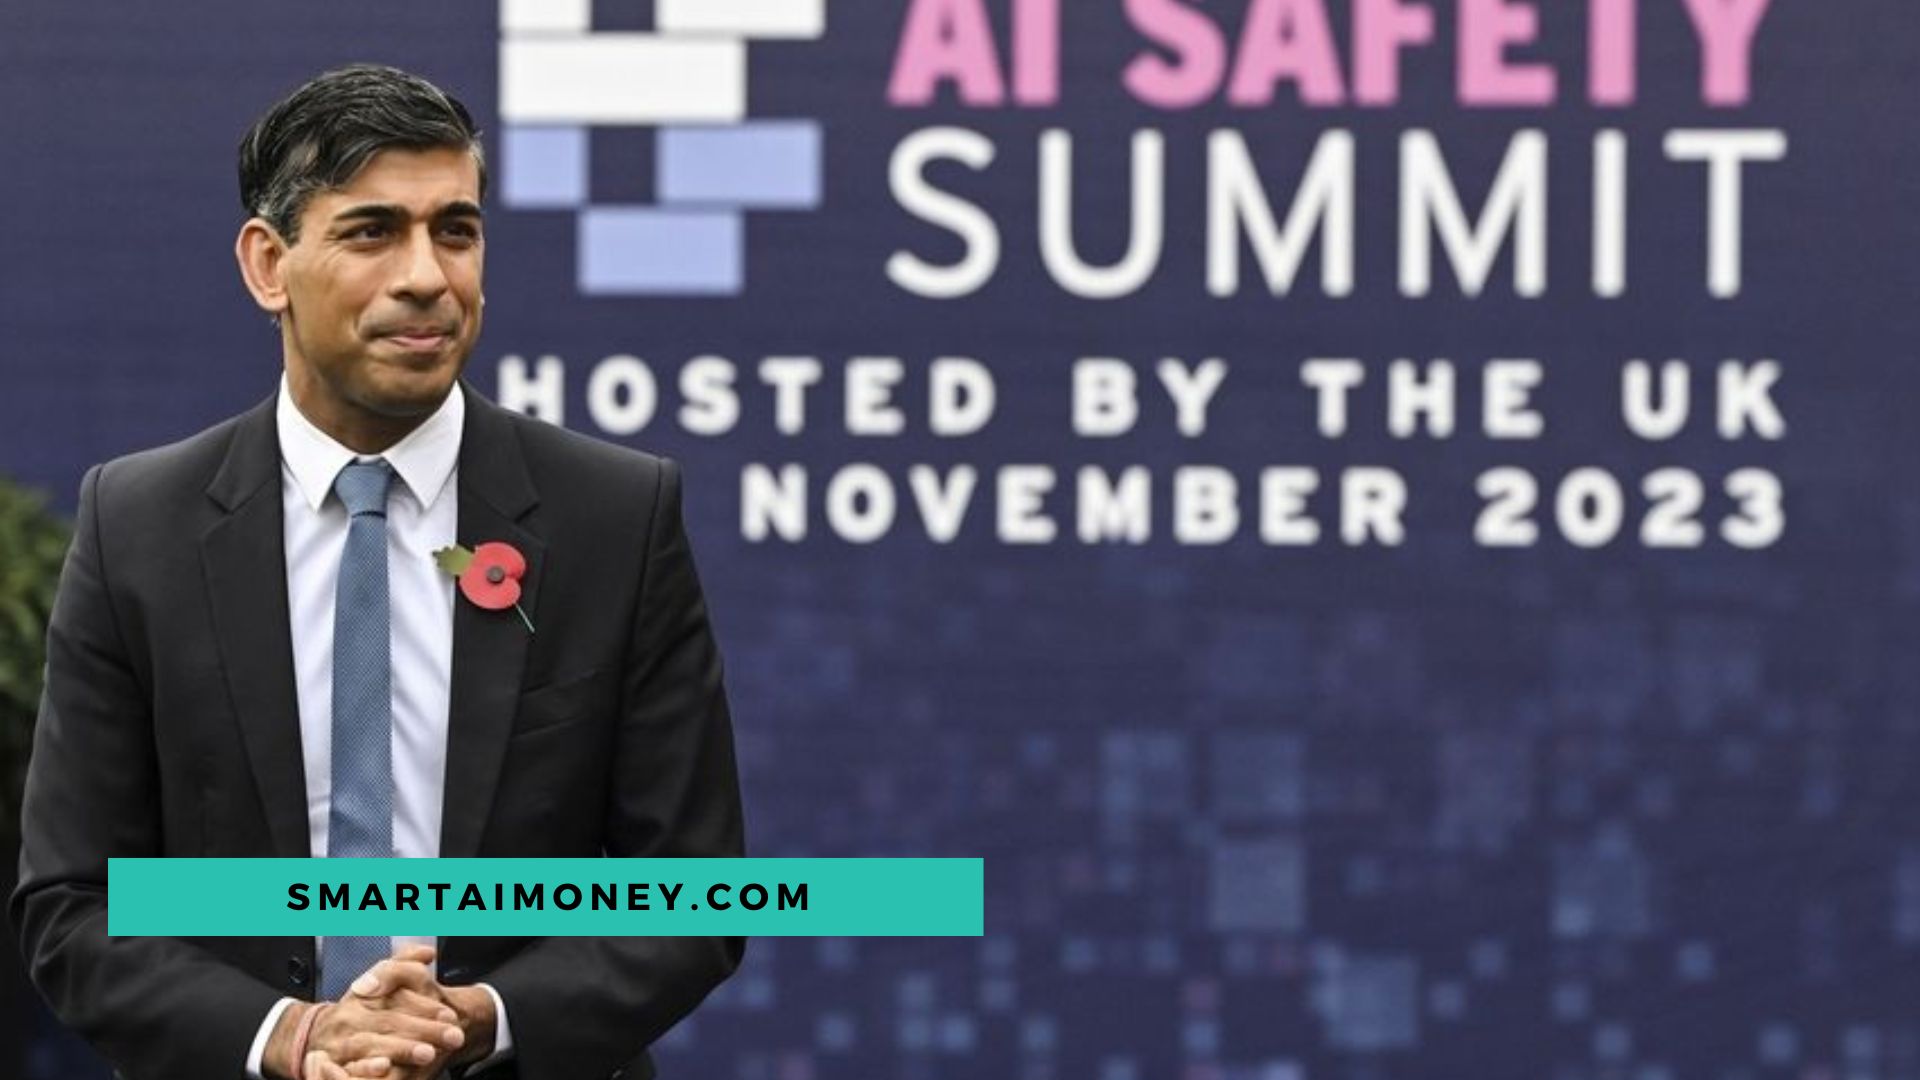 the Pioneering AI Safety Summit at Bletchley Park 2023